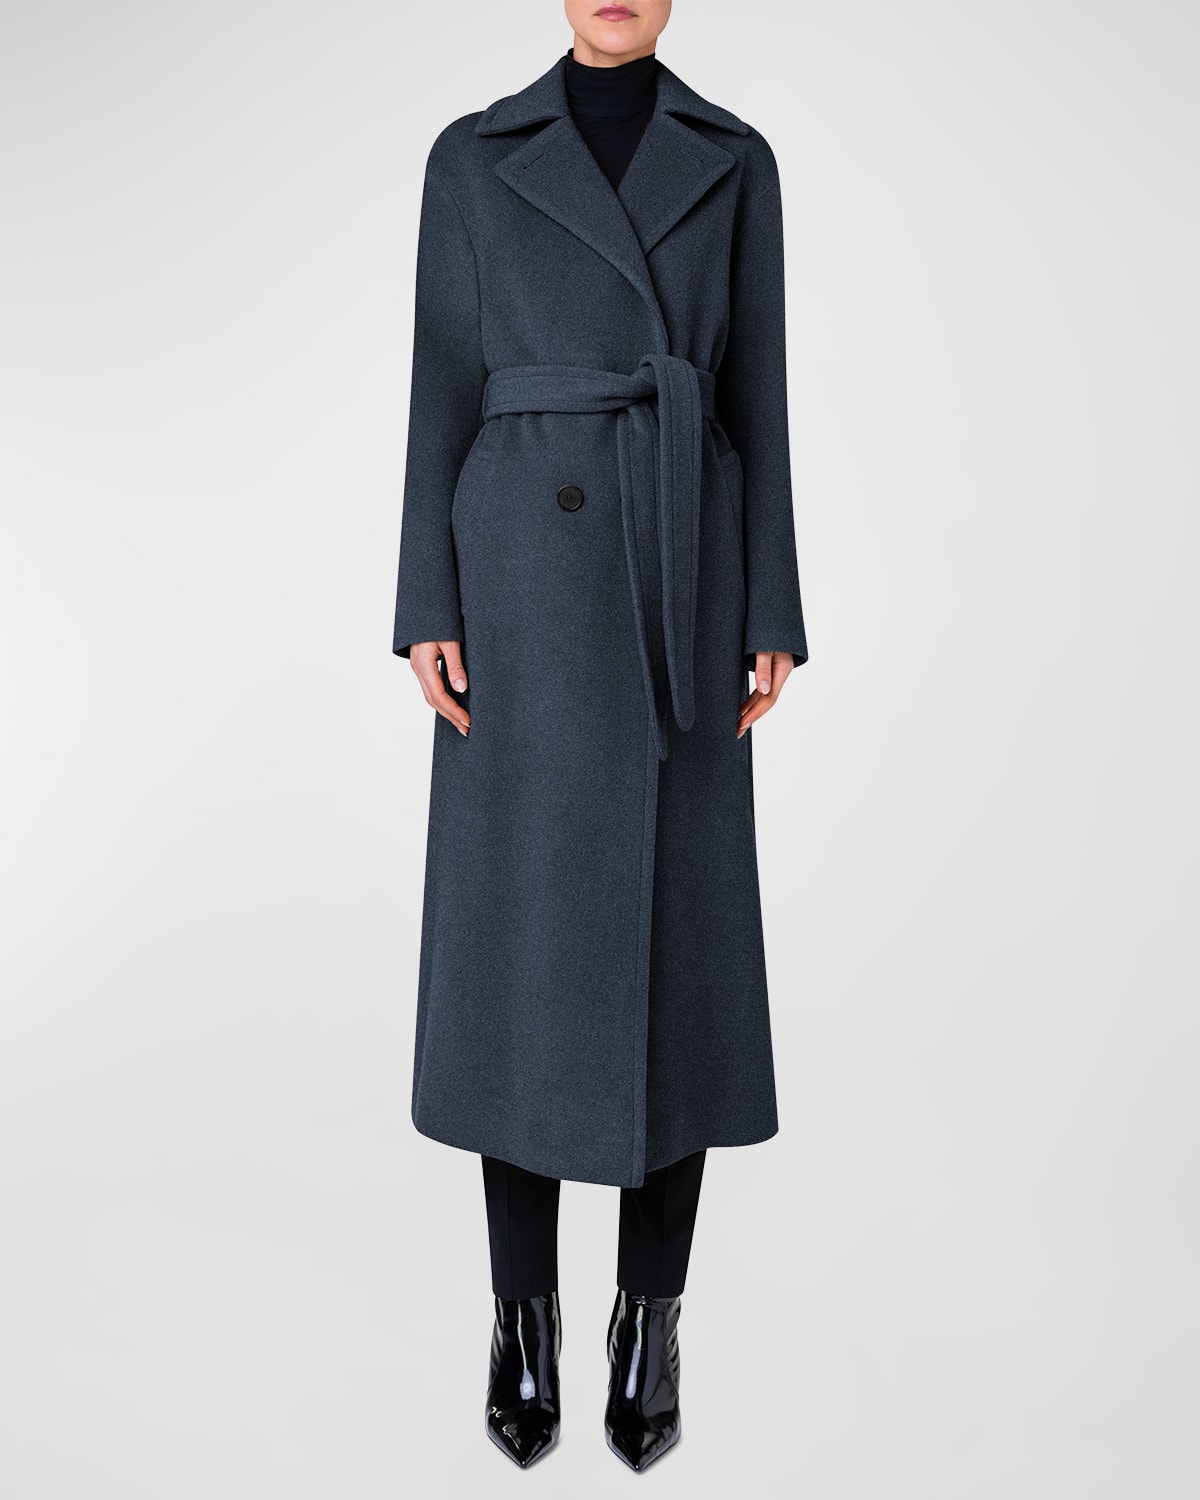 Akris Punto Long Double-breast Belted Wool-cashmere Coat In Charcoal